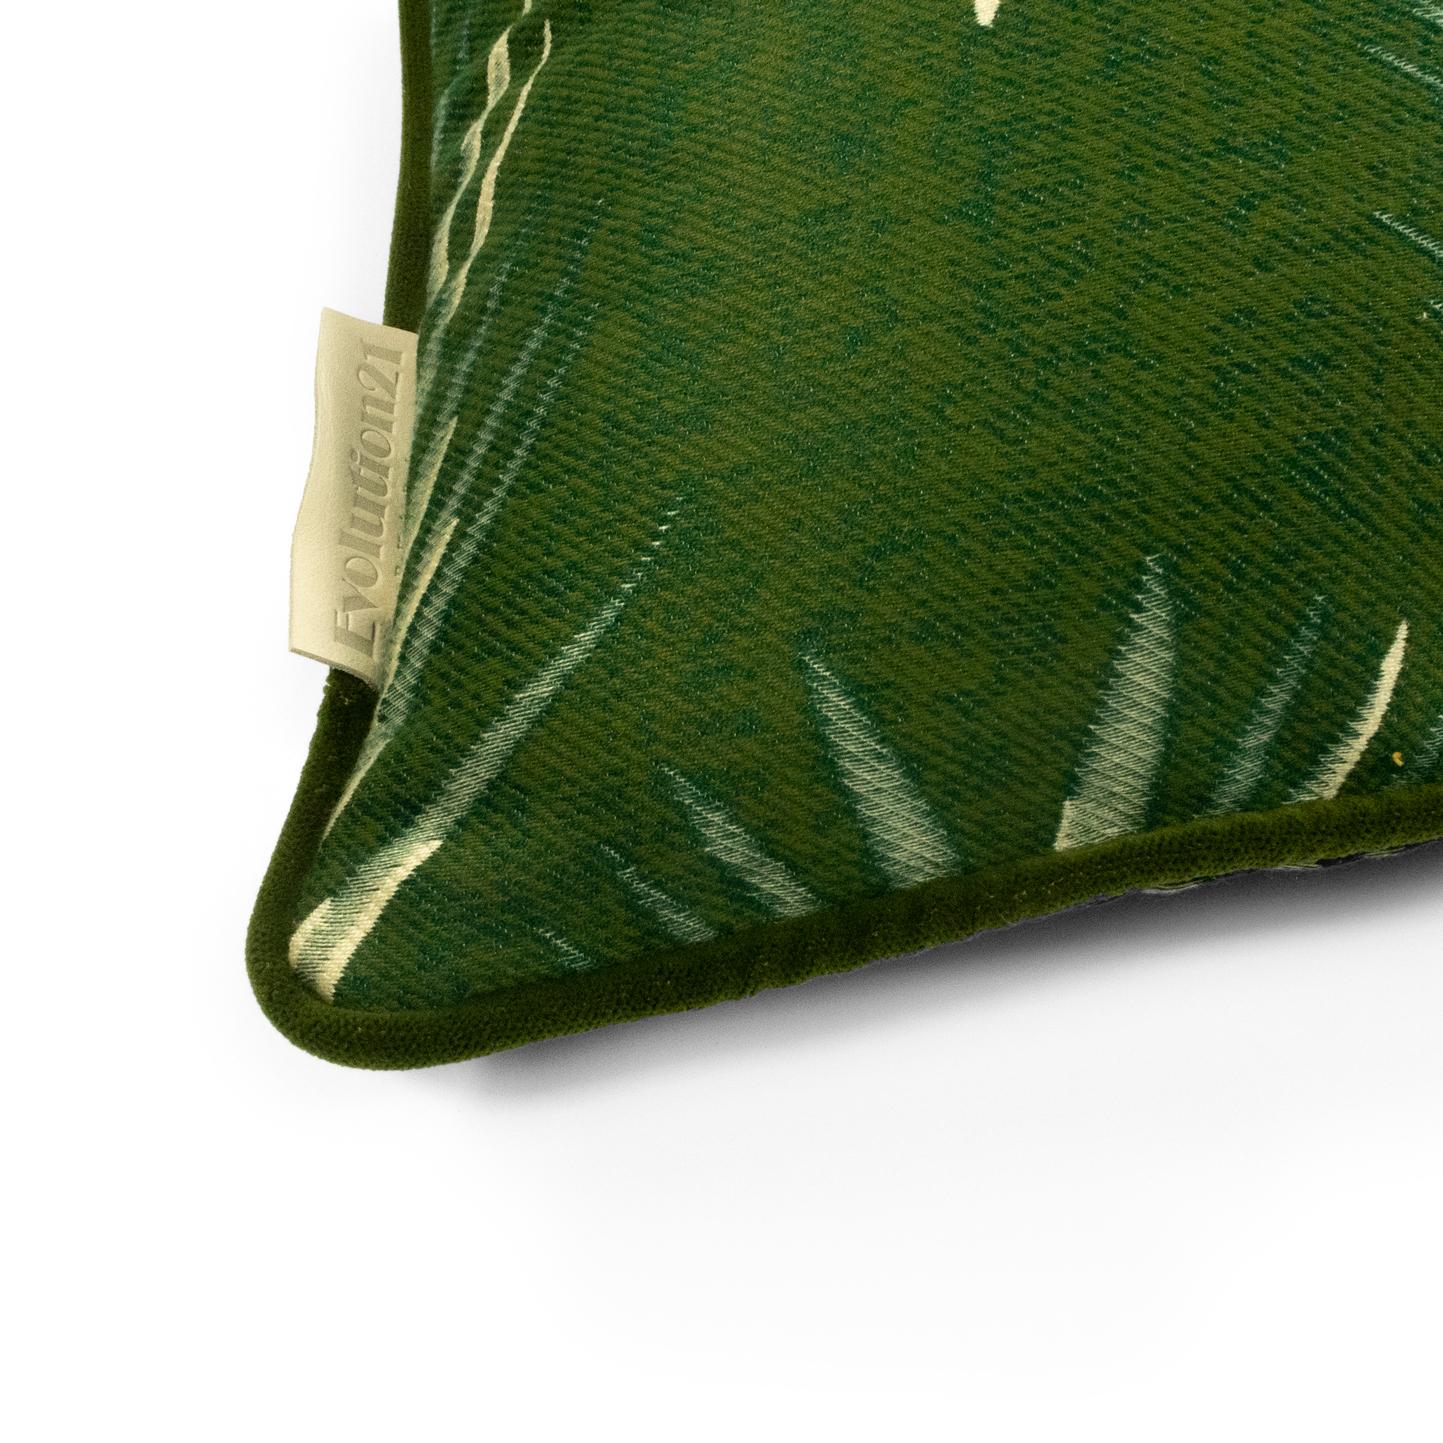 Belgian Cushion / Pillow Patterned Bamboo Reverse Leaf Green by Evolution21 For Sale